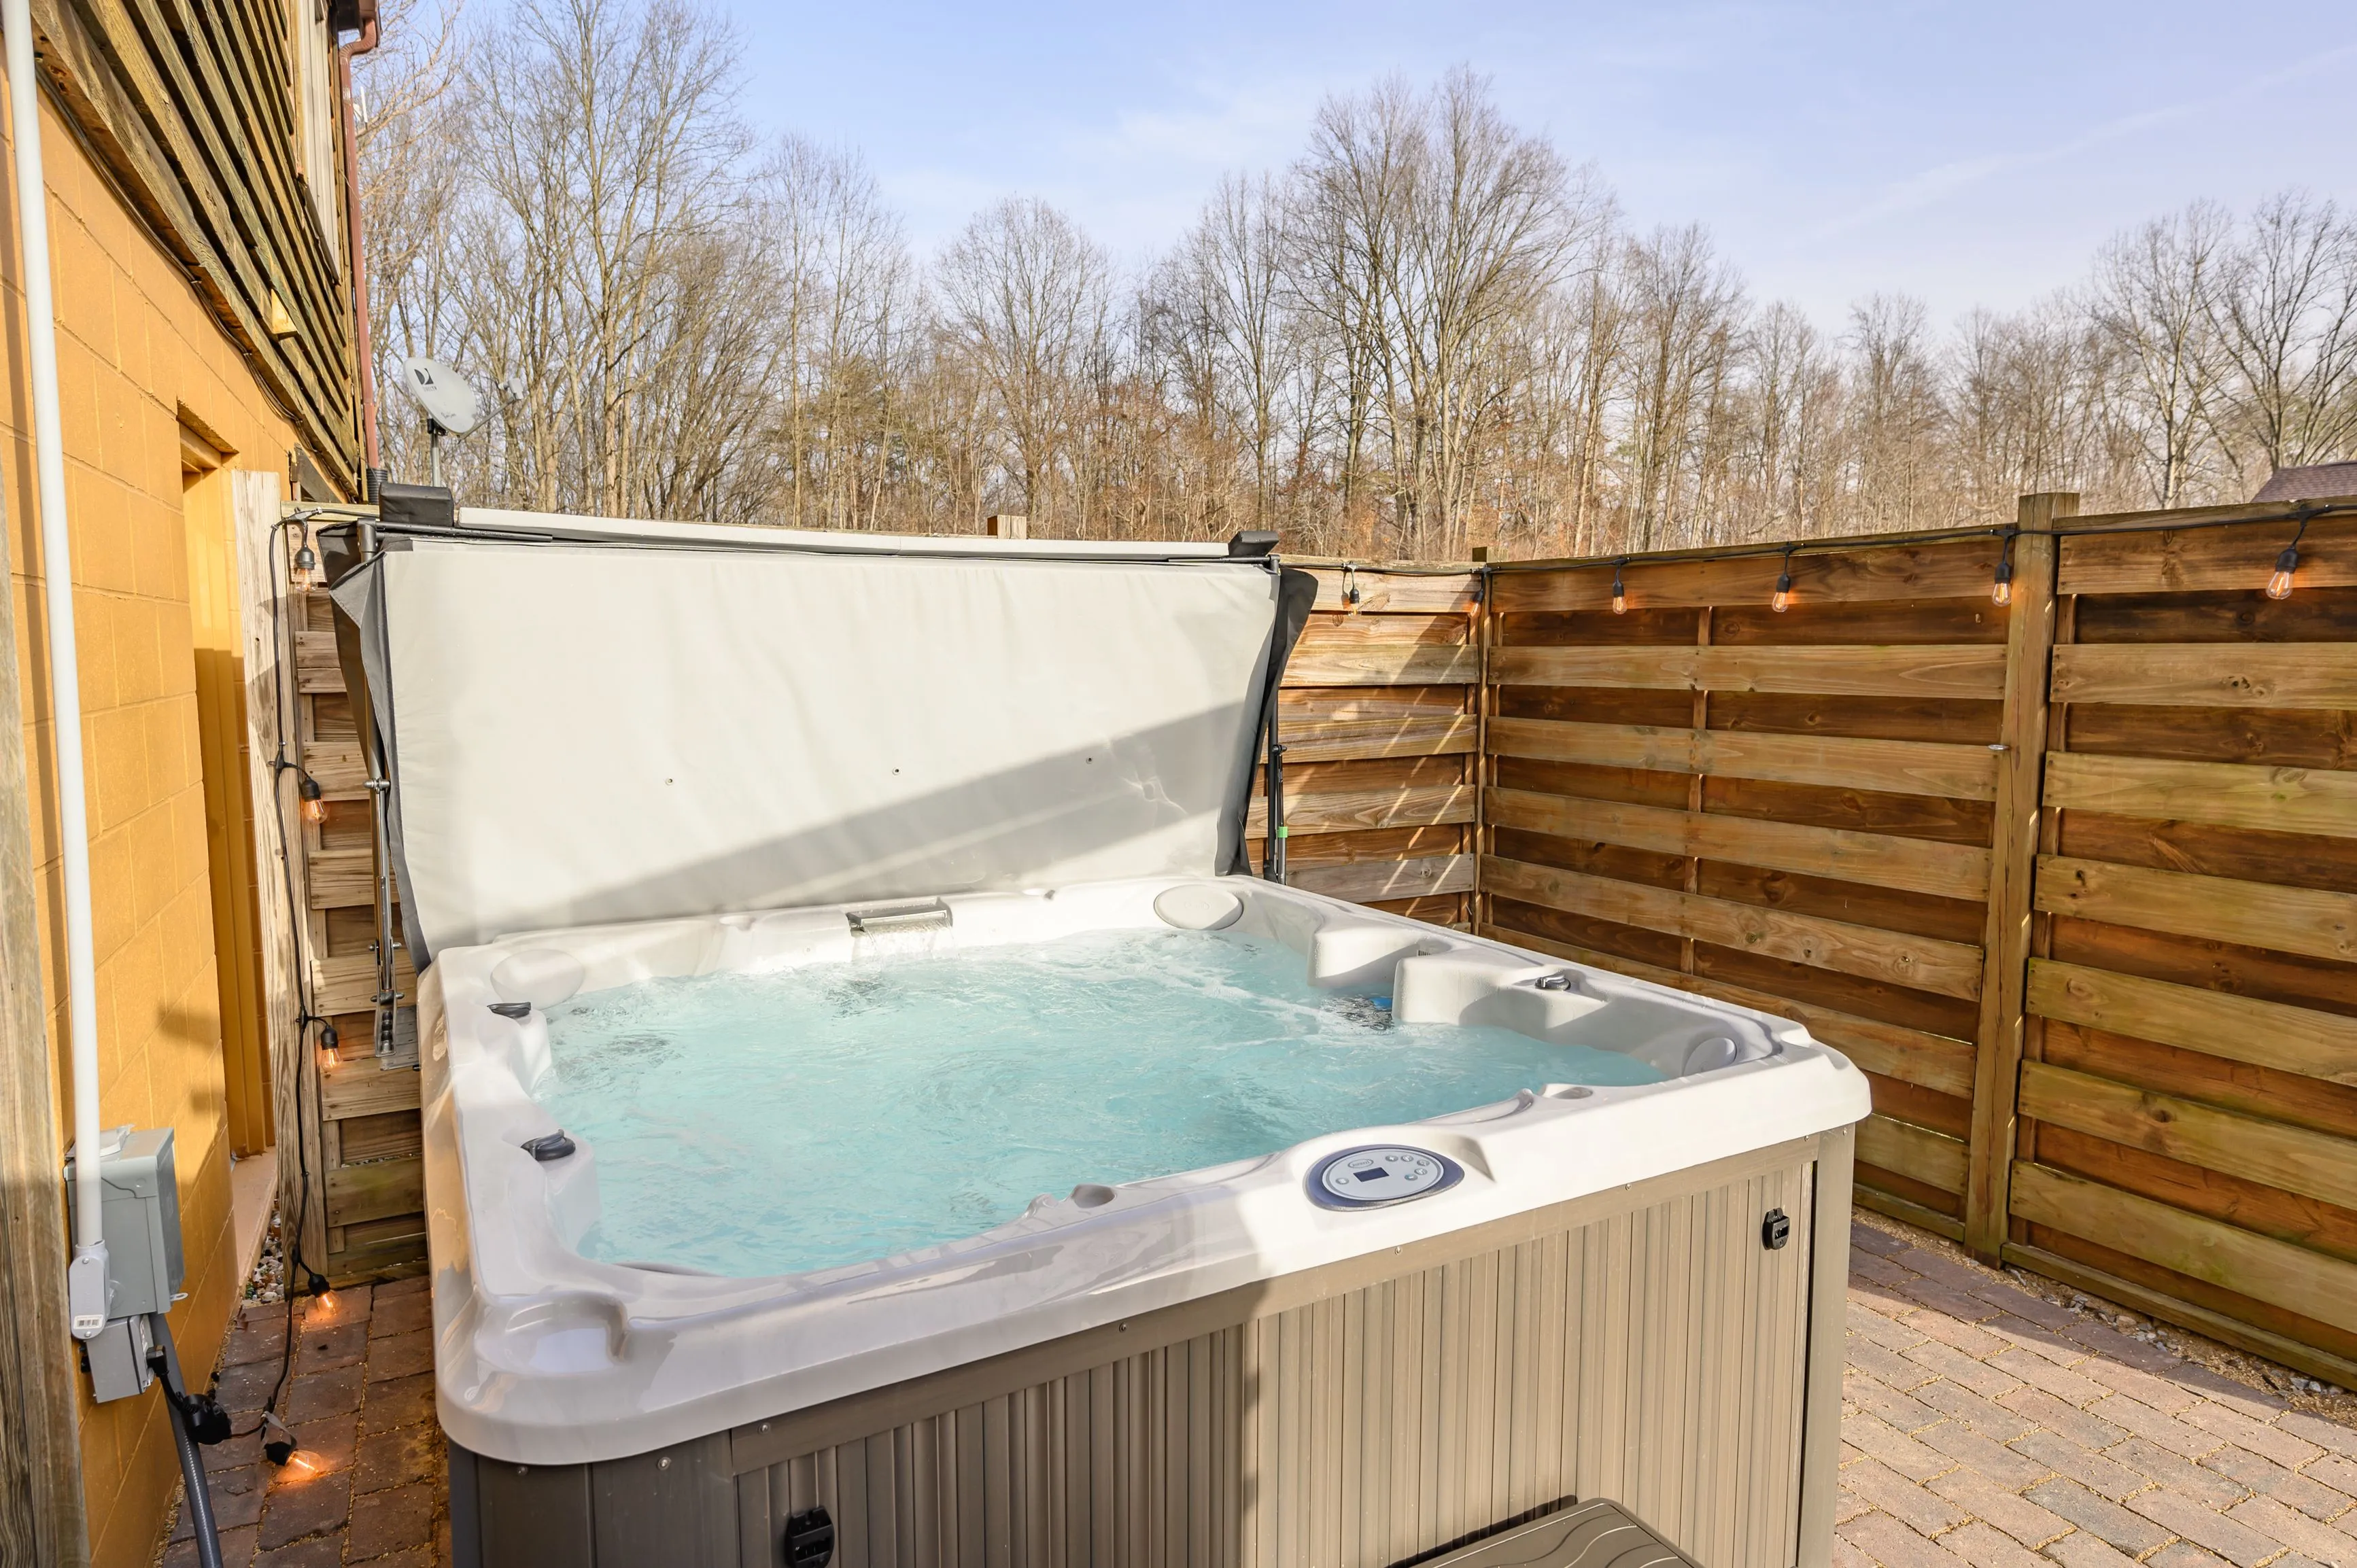 Outdoor home jacuzzi with open cover on a patio, surrounded by a wooden fence, with bare trees and blue sky in the background.